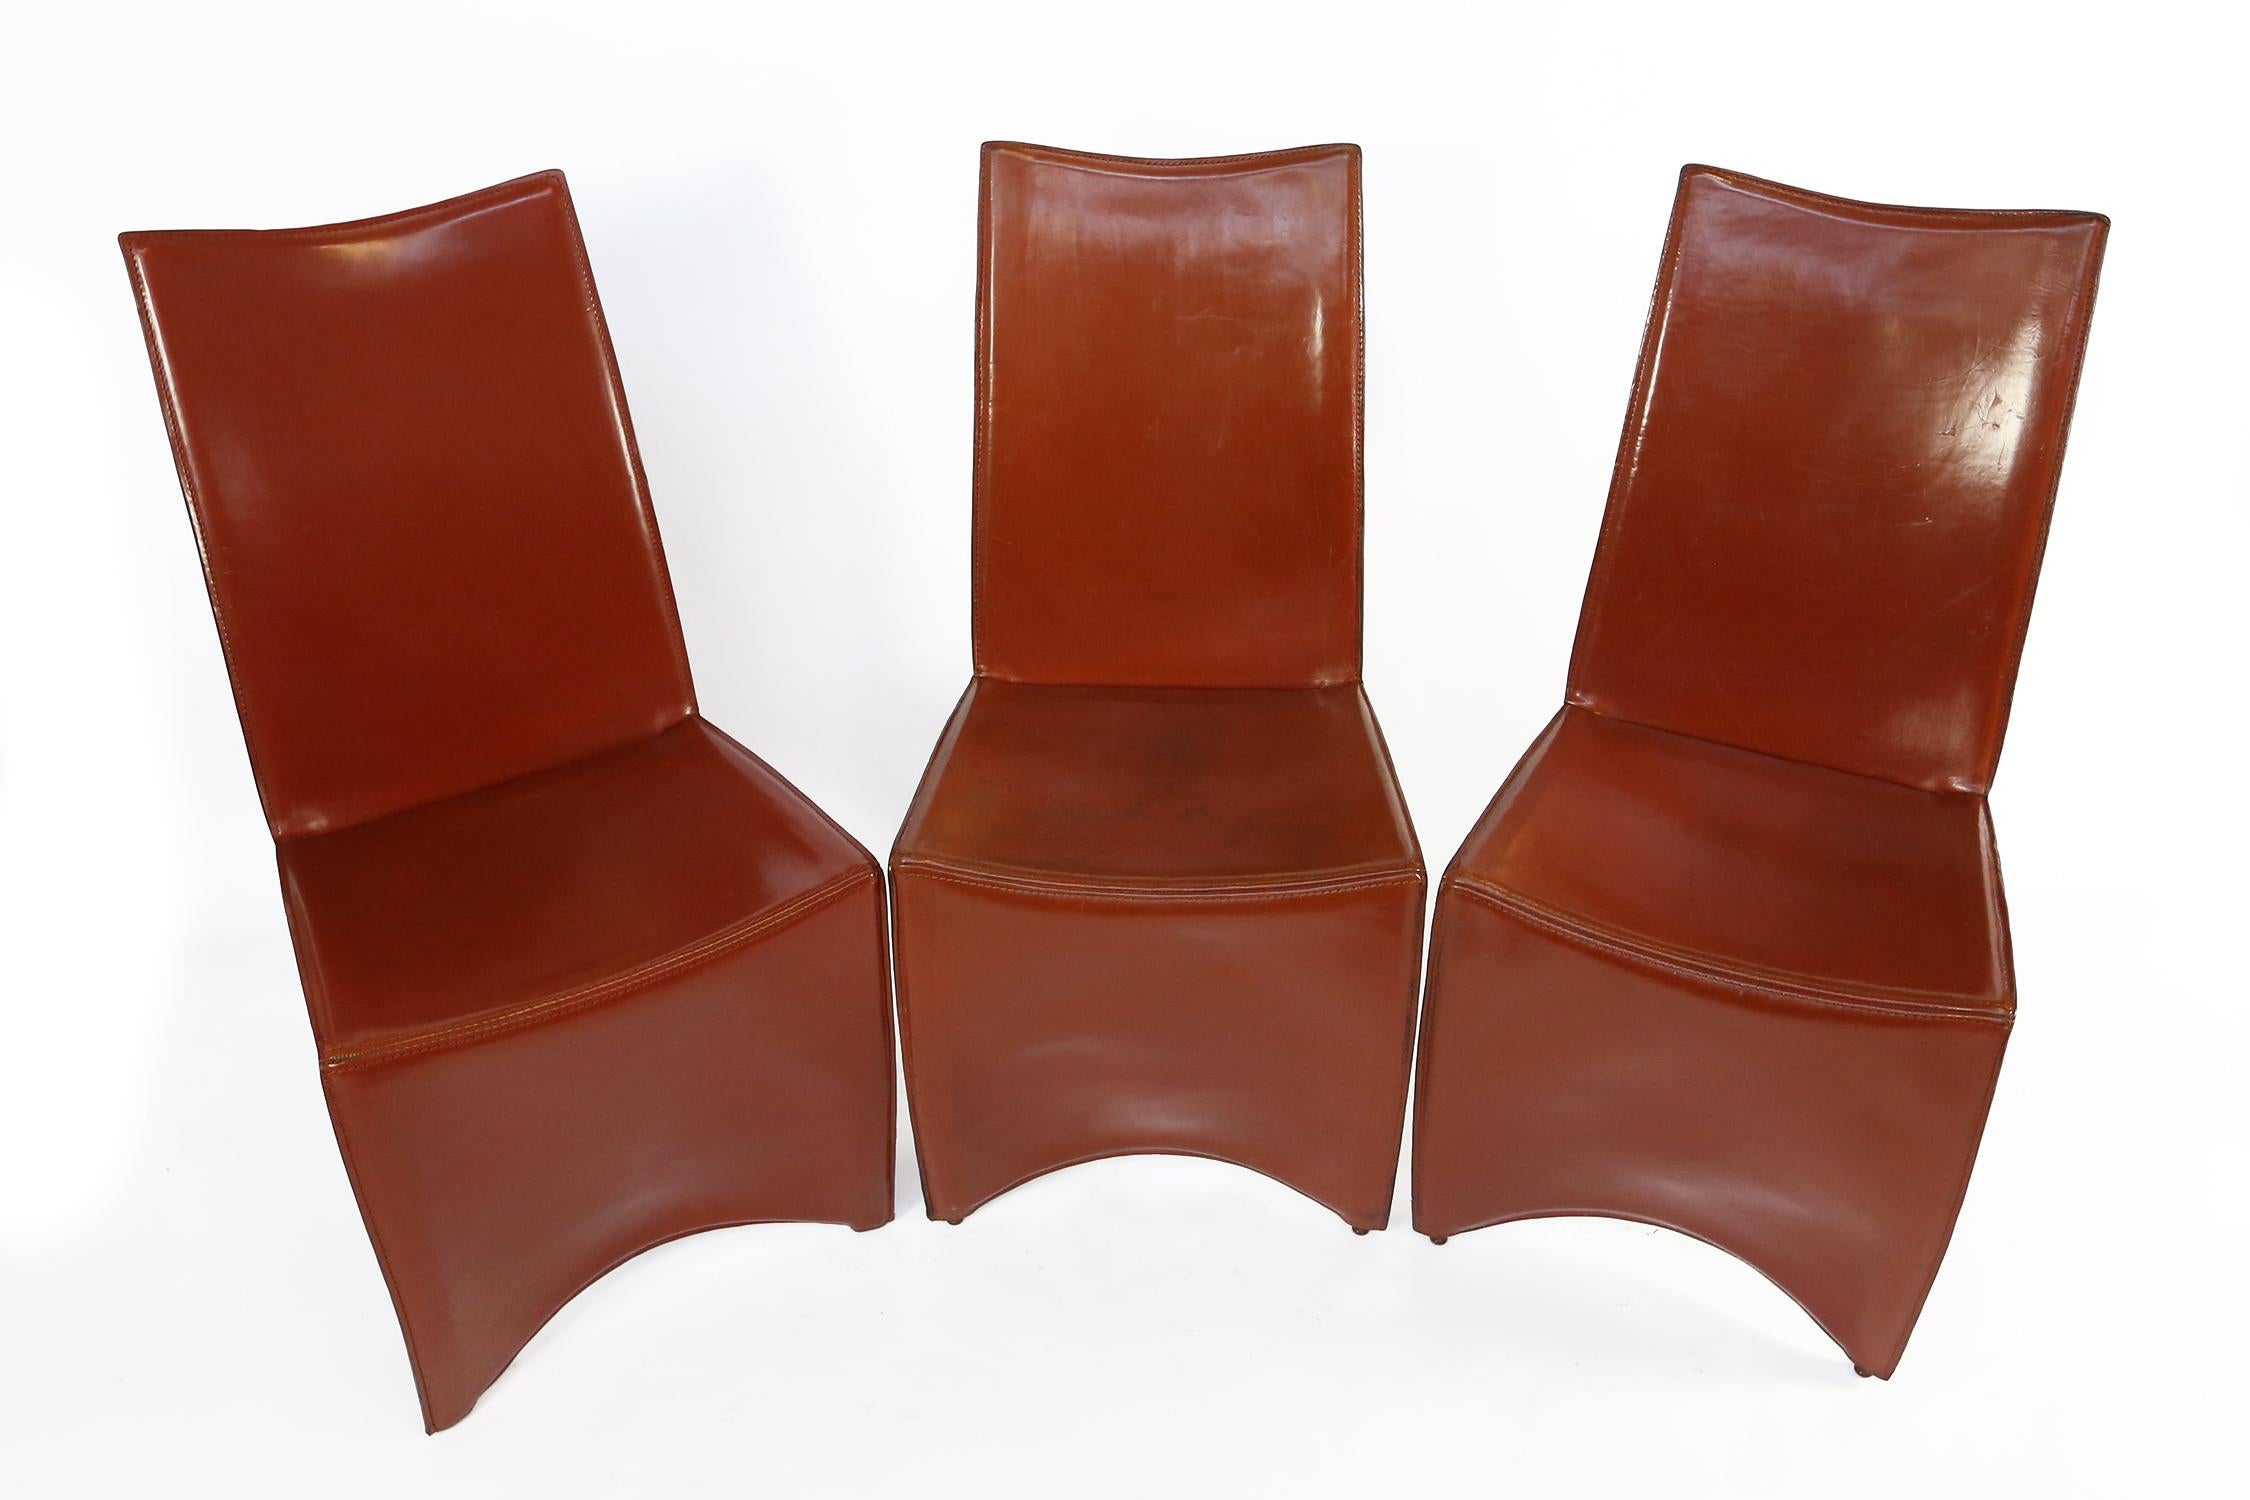 Late 20th Century Set of Six Cognac Leather ‘Ed Archer' Chairs by Philippe Starck for Aleph, Italy